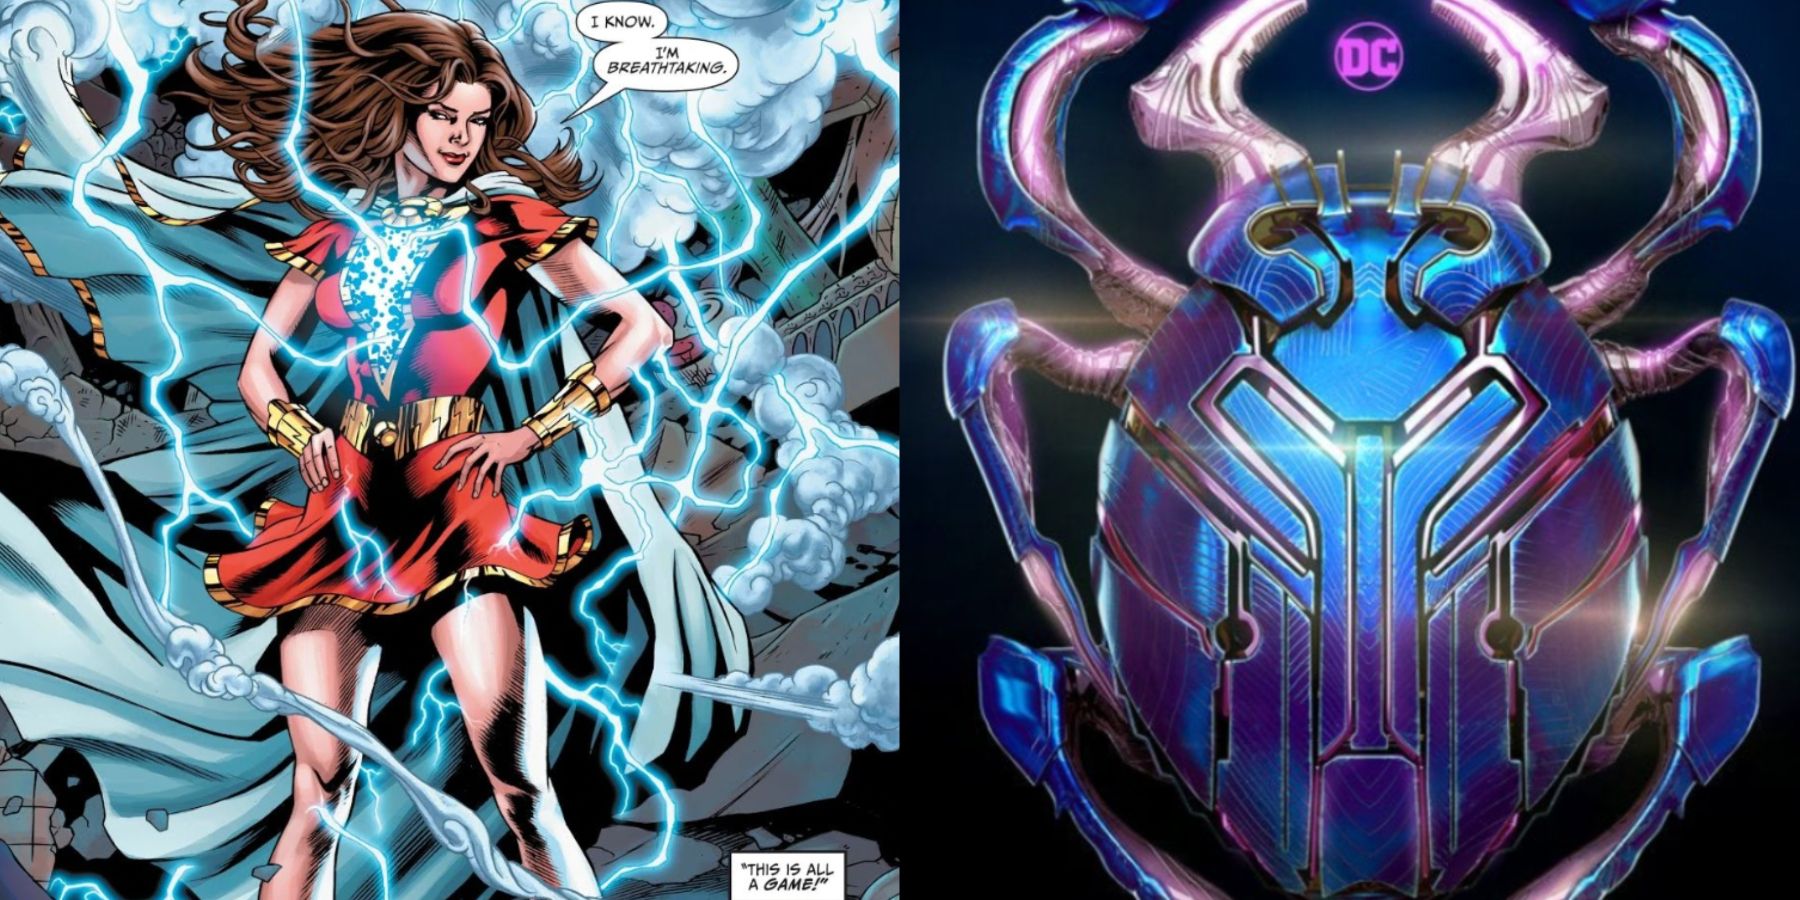 A split image features Mary as Lady Shazam in DC Comics and the movie poster for Blue Beetle